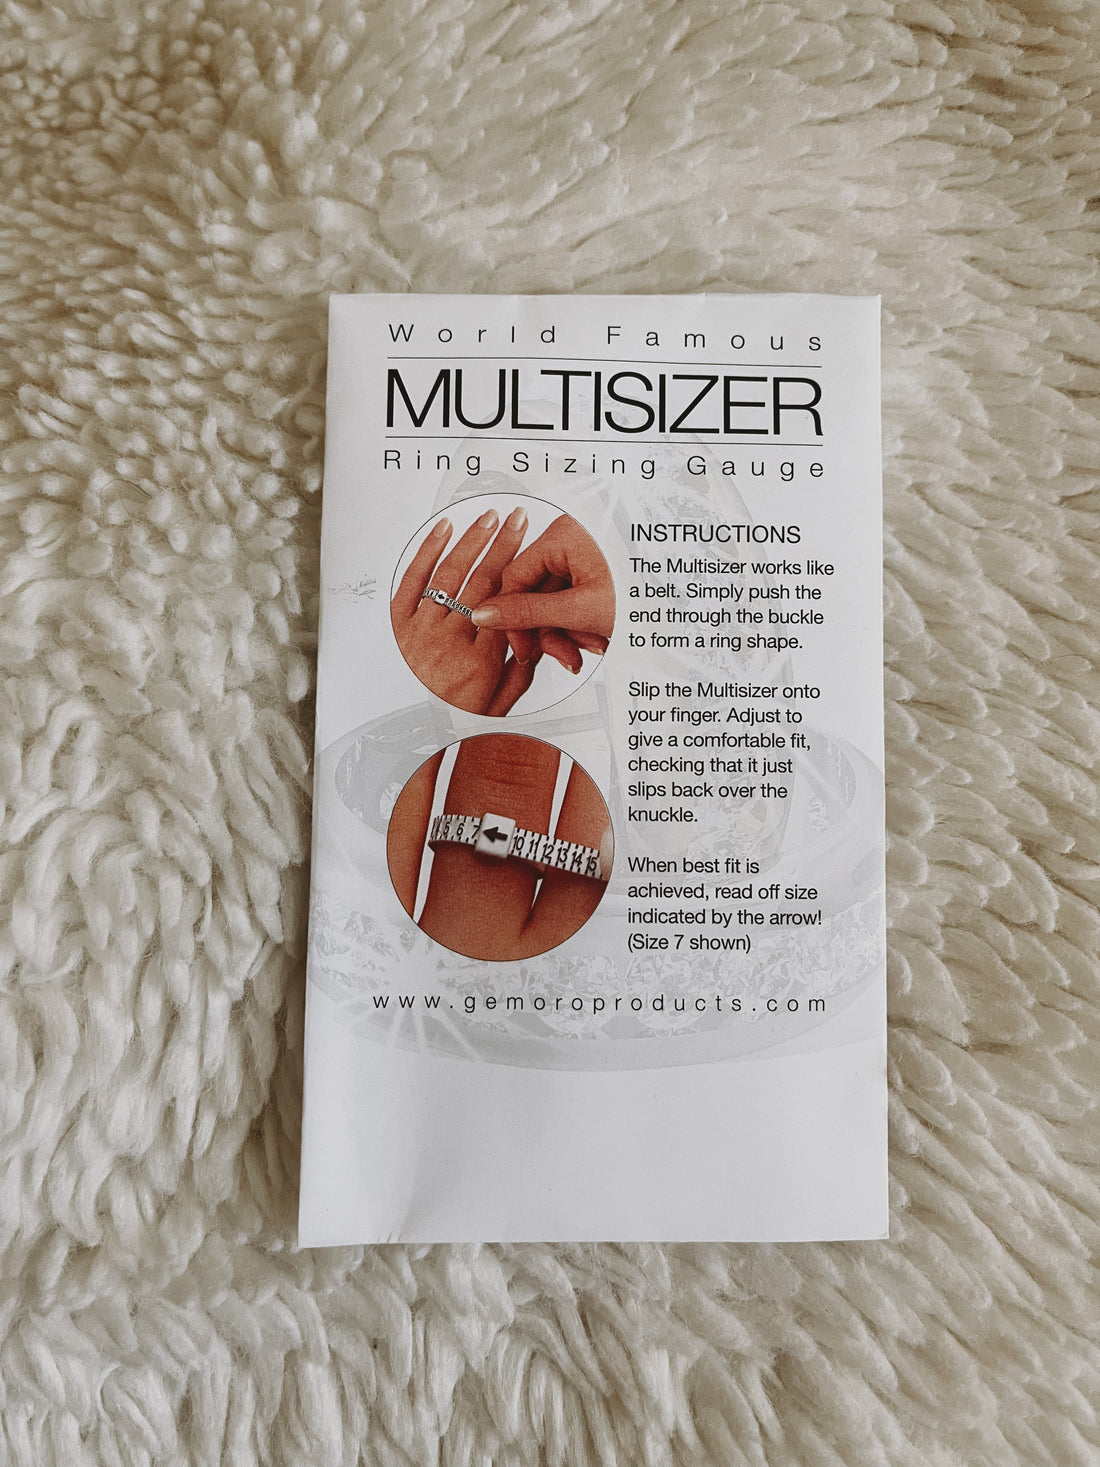 The packaging of the ring sizing tool, called a multisizer